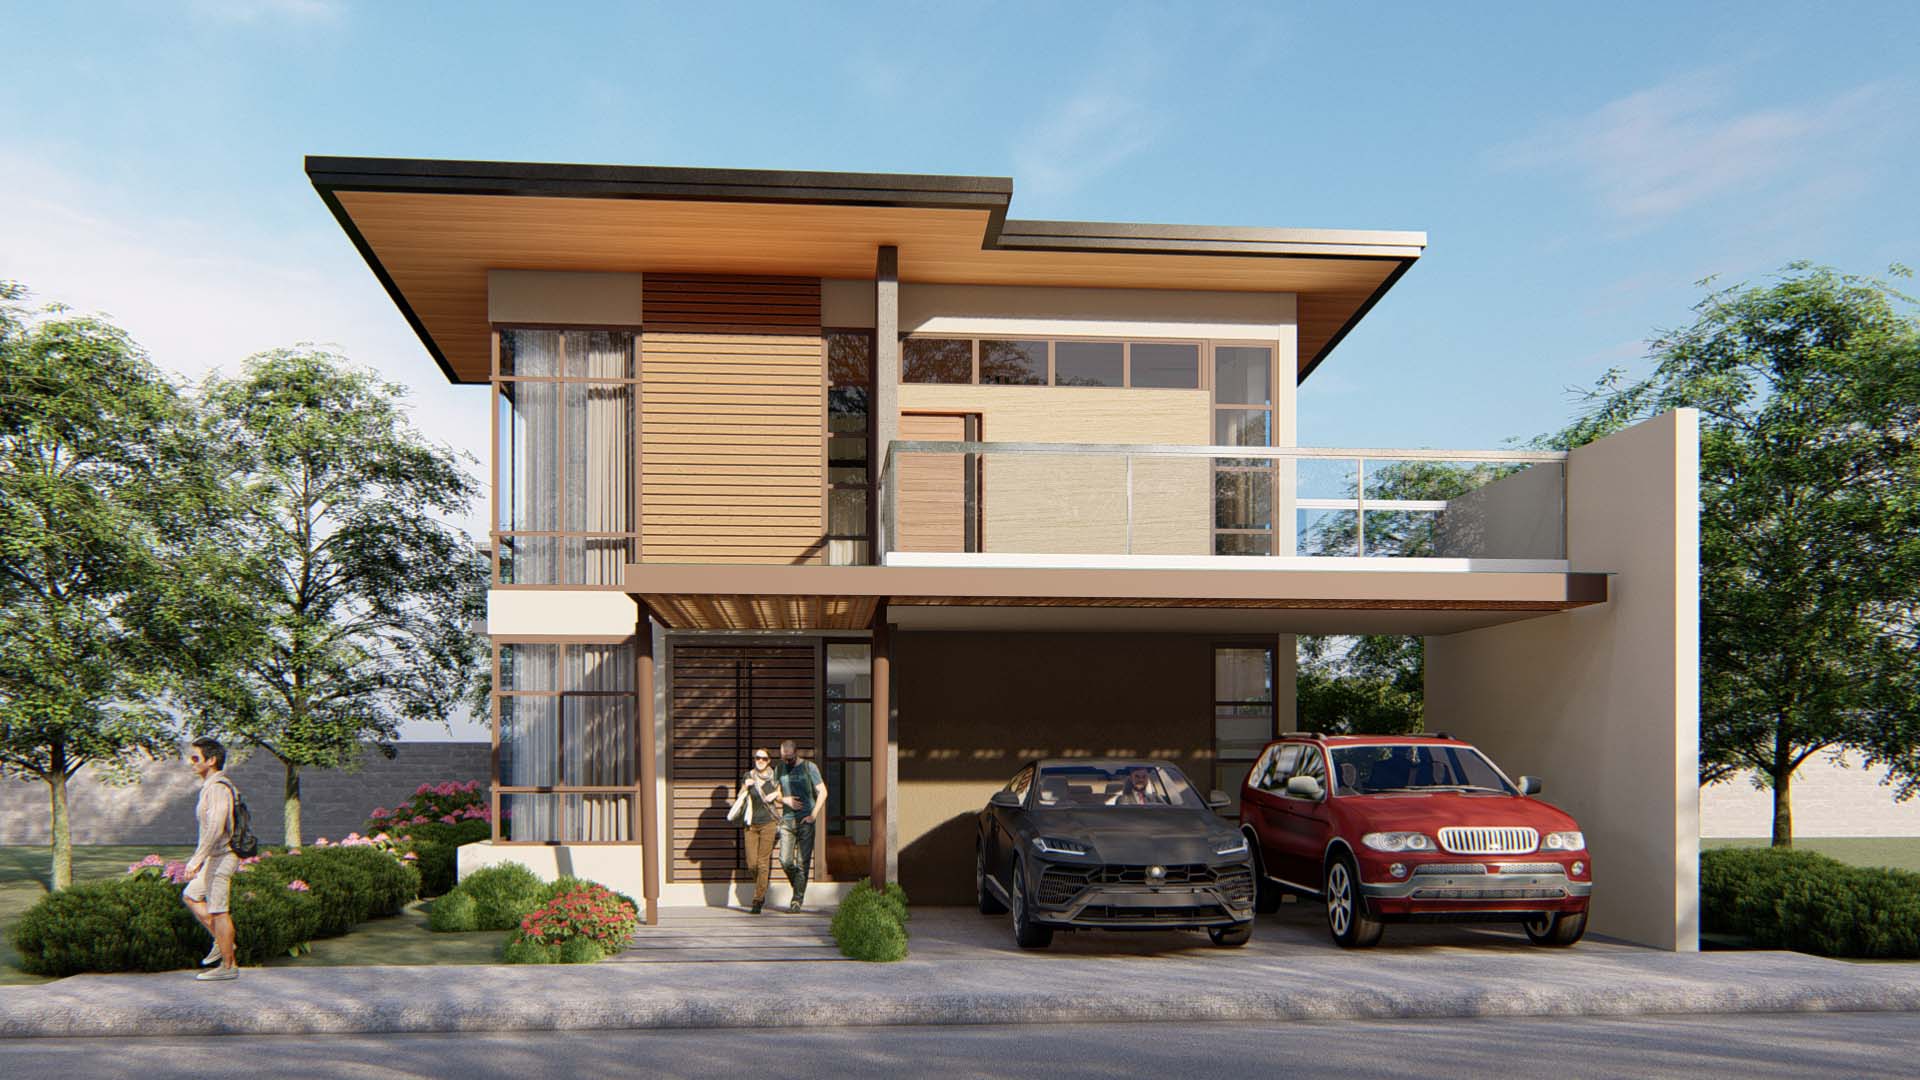 Prana Garden Villas residential village with 2 vehicles and 2 person